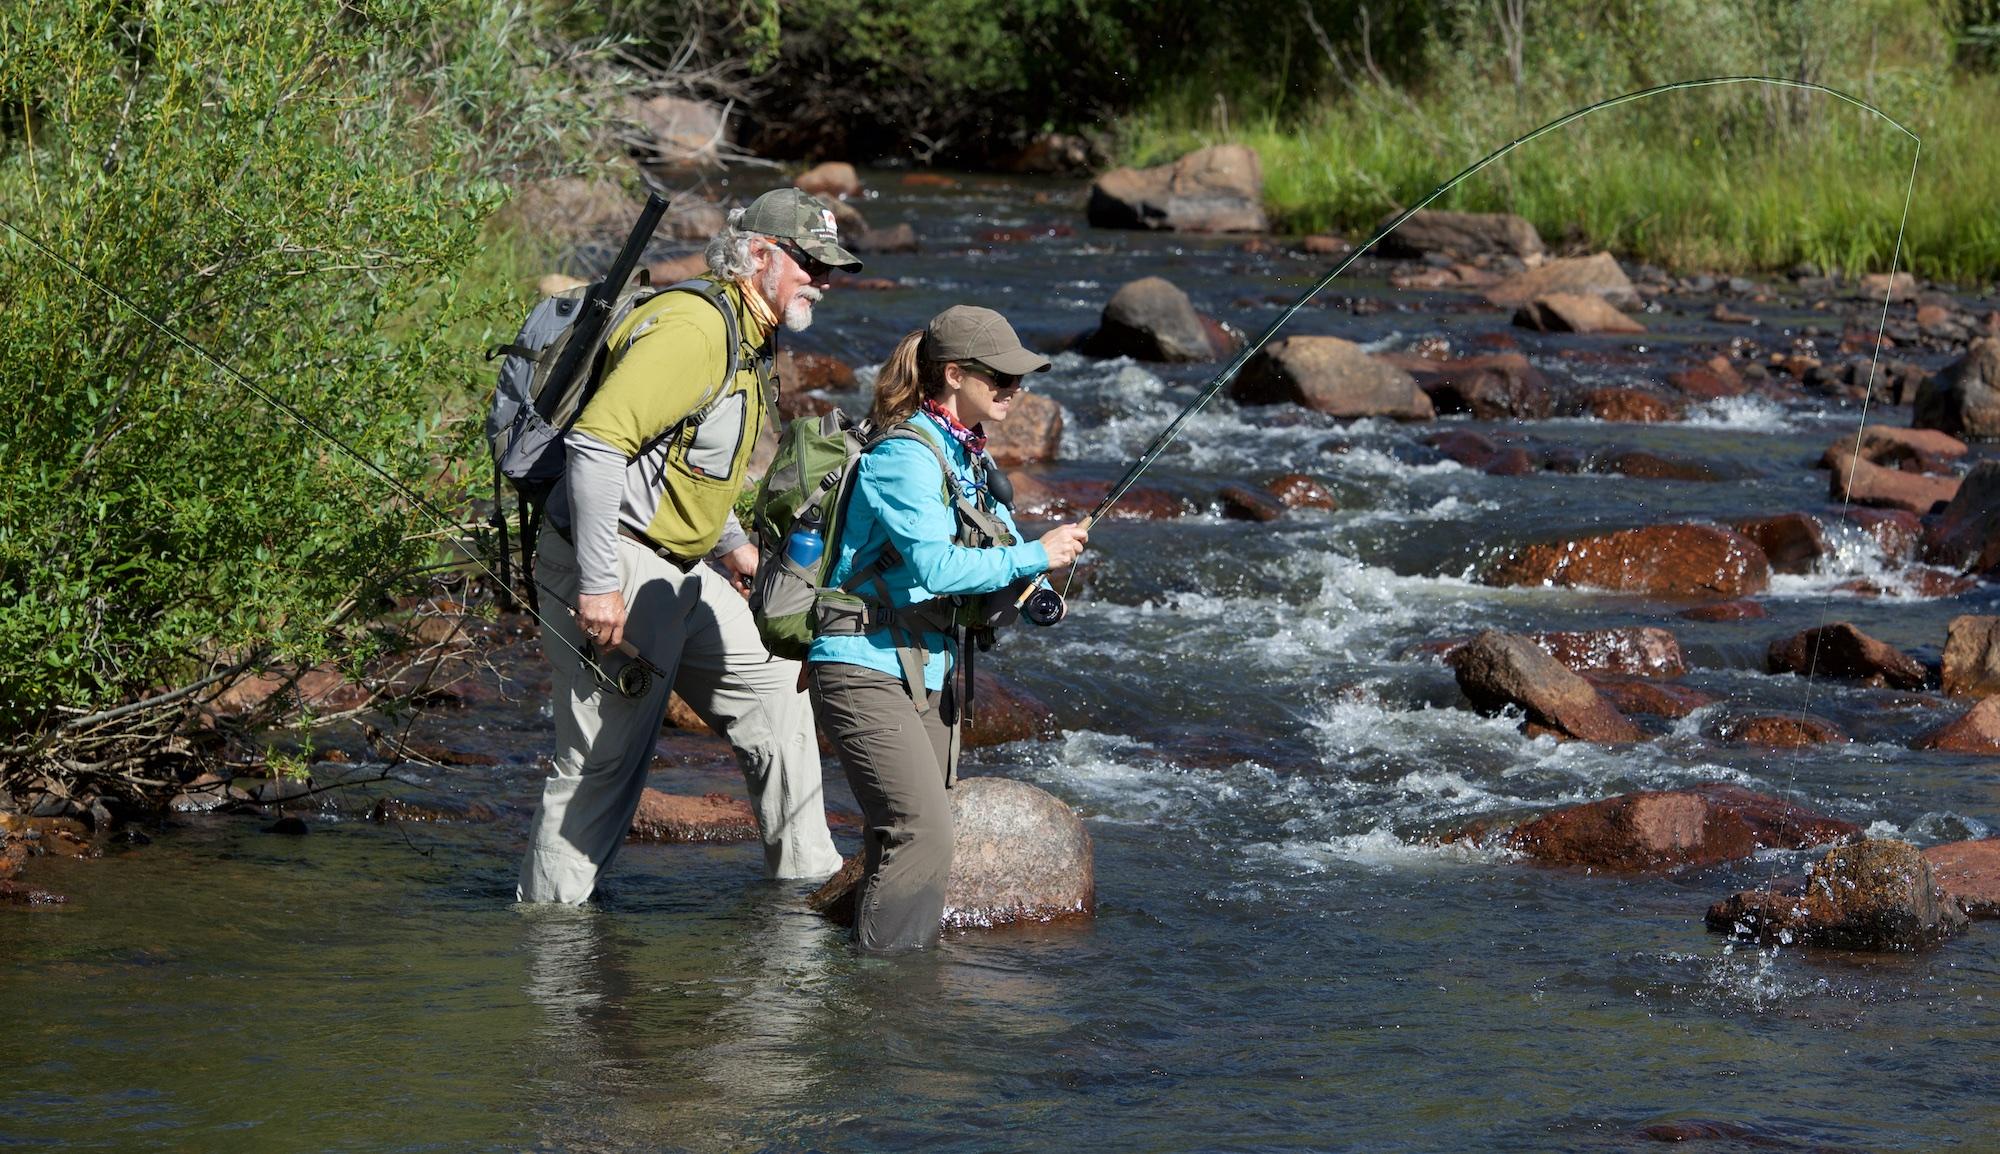 Fly Fishing 101 - In The Classroom, 12600 W Colfax Ave, Lakewood, CO  80215-3722, United States, 21 April 2024